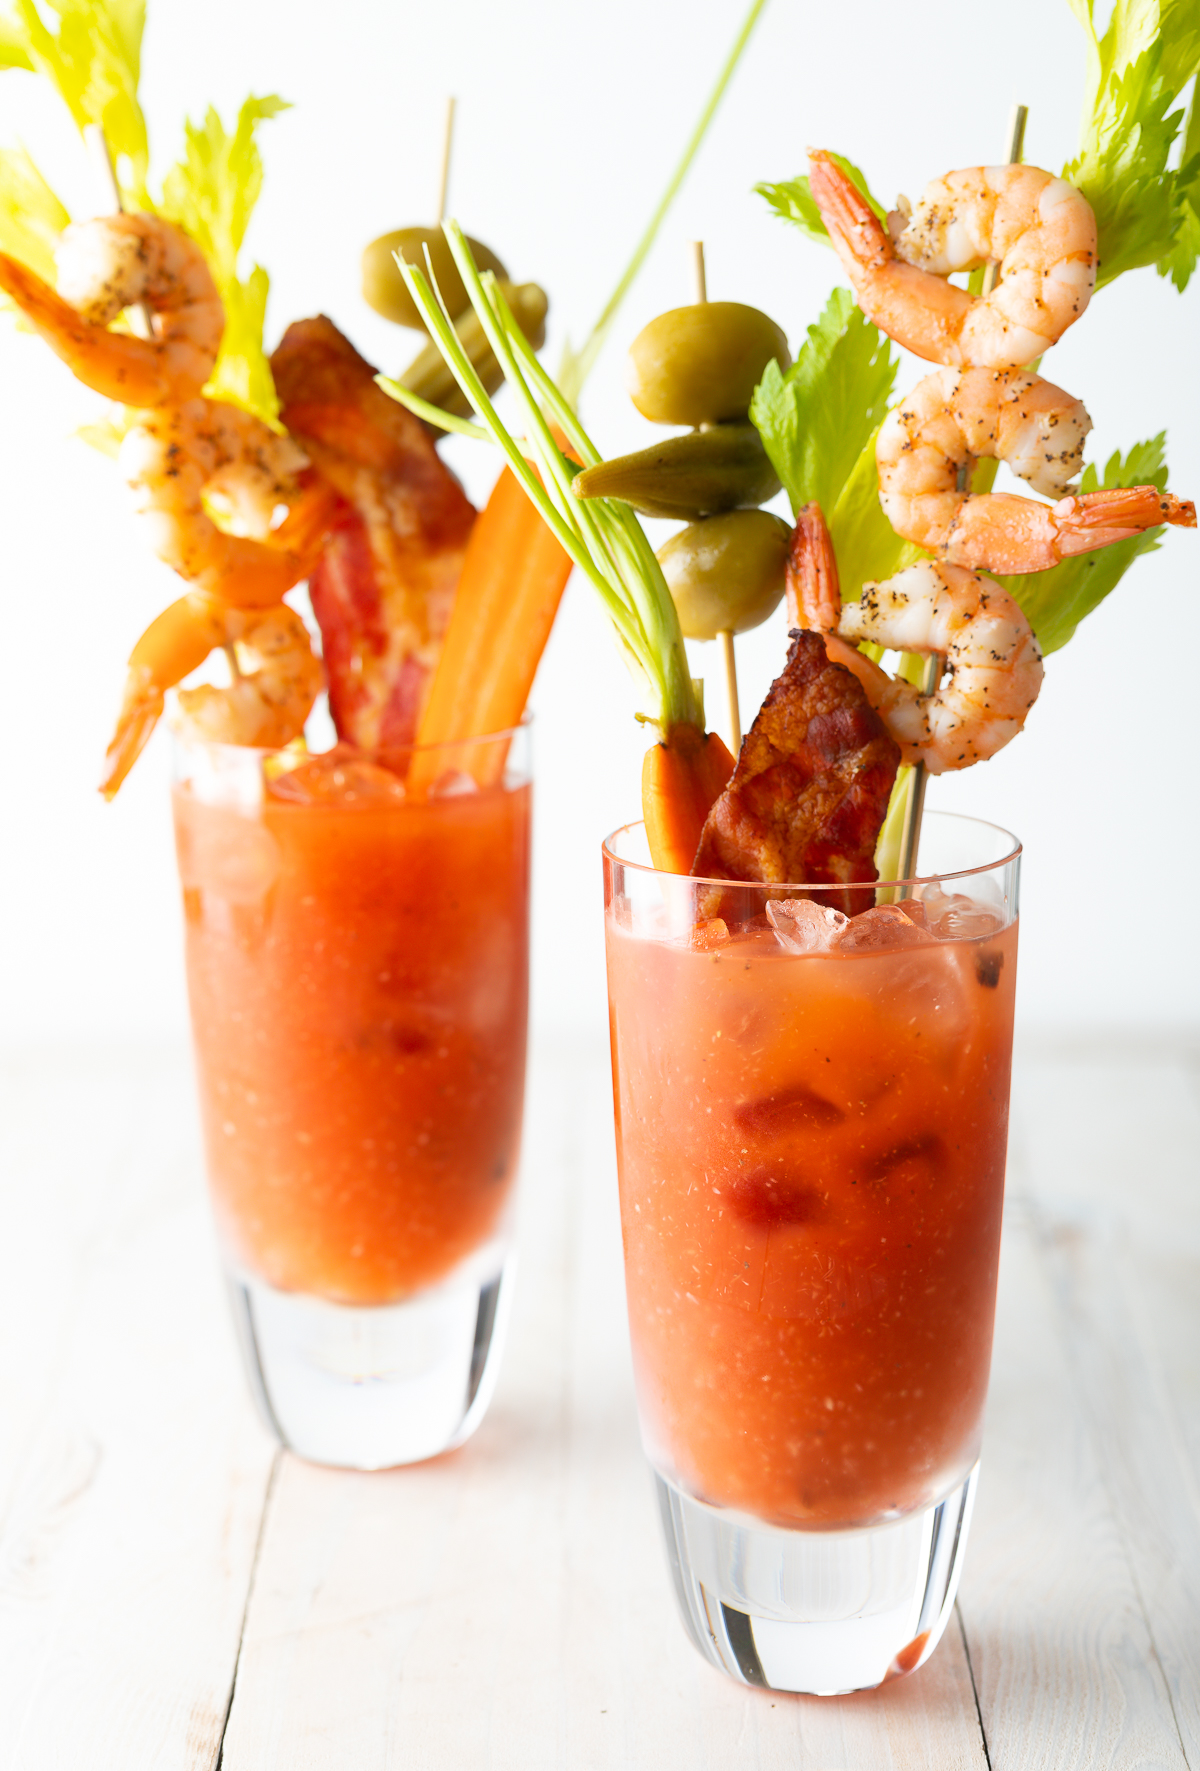 Lt. Dan’s Best Bloody Mary Mix Recipe (Homemade!) A